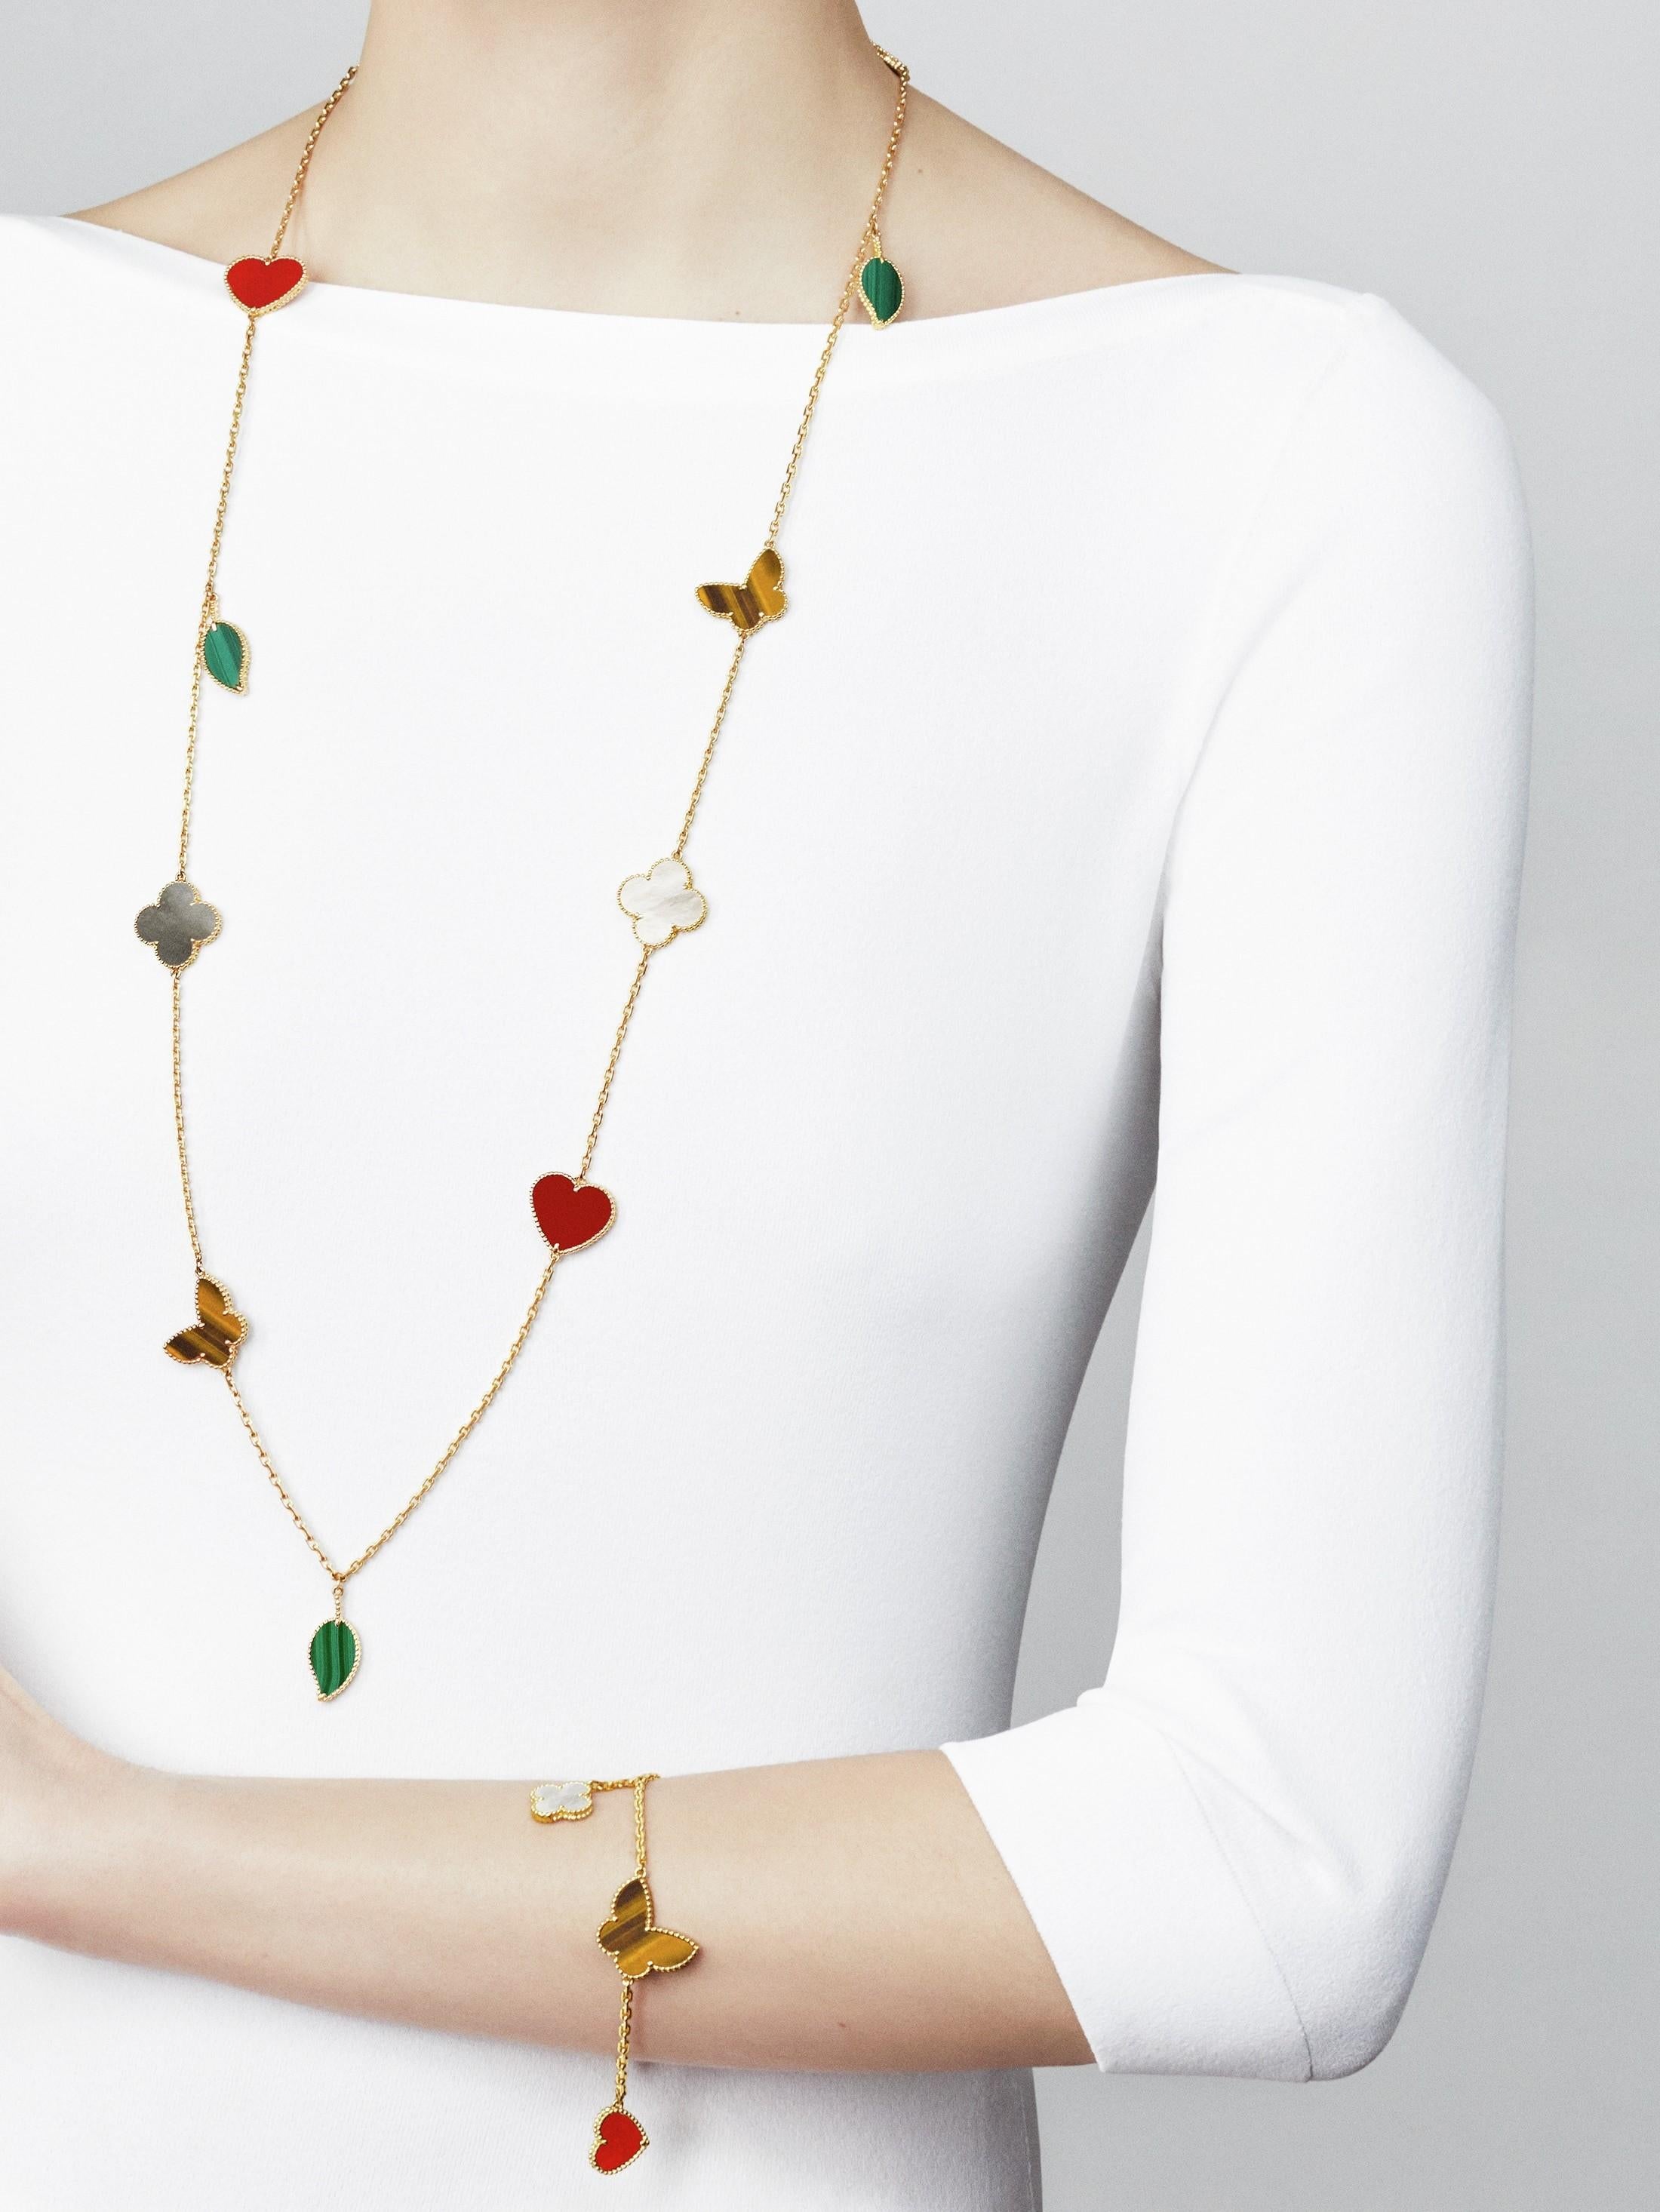 Lucky Alhambra long necklace, 12 motifs, 18K yellow gold, carnelian, tiger’s eye, white and gray mother-of-pearl, malachite.
REF. VCARD80100
Carnelian: 2 stones
Malachite: 3 stones
Mother-of-pearl: 5 stones
Tiger Eye: 2 stones
Concealed clasp in 18K